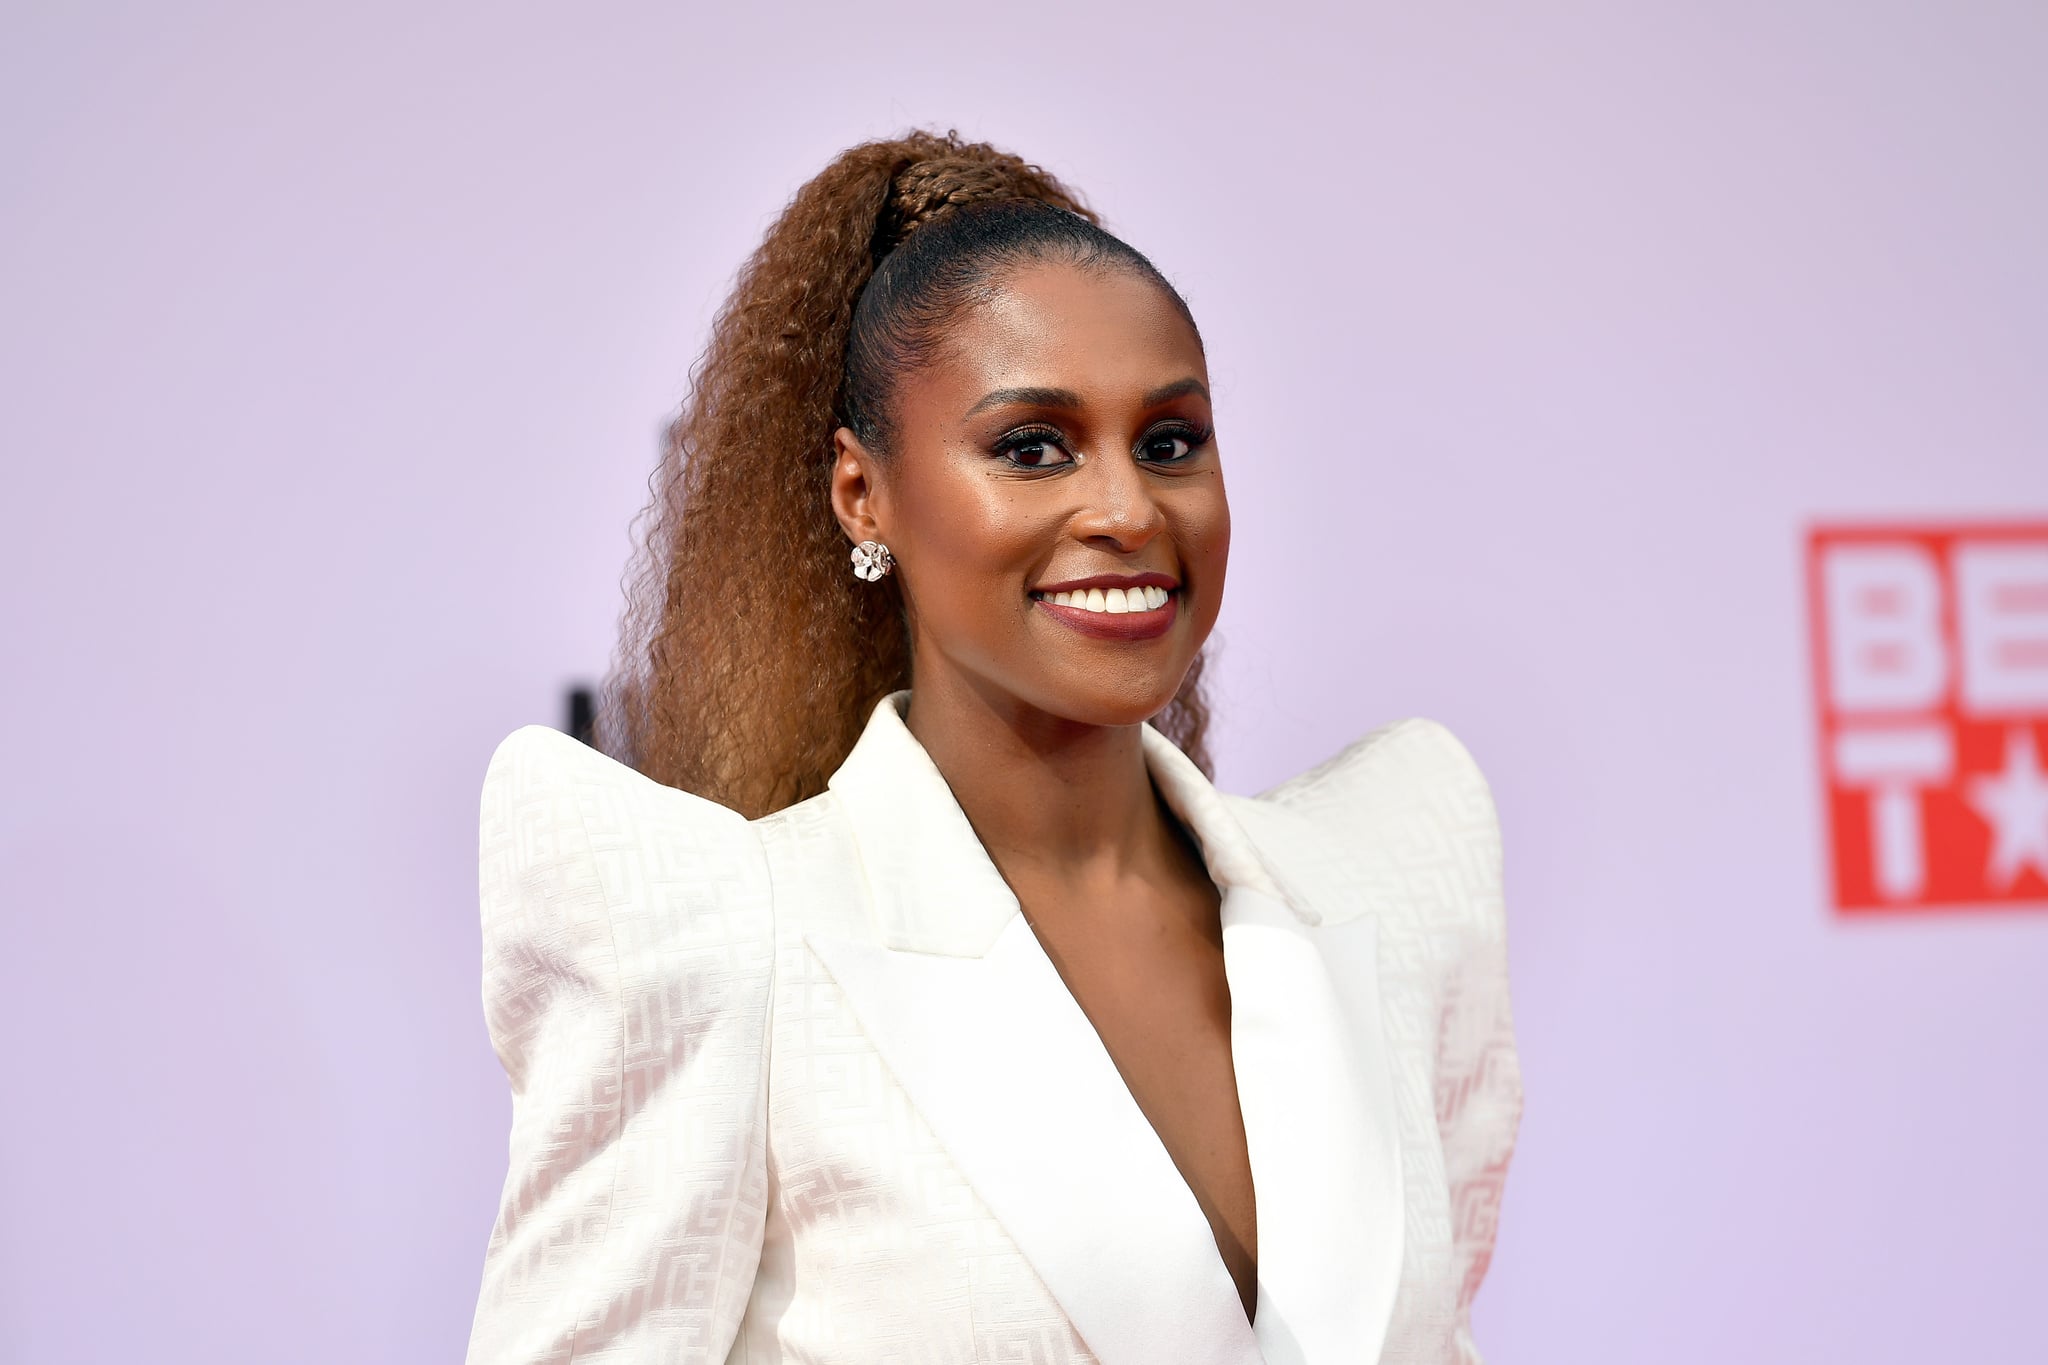 LOS ANGELES, CALIFORNIA - JUNE 27: Issa Rae attends the BET Awards 2021 at Microsoft Theatre on June 27, 2021 in Los Angeles, California. (Photo by Paras Griffin/Getty Images for BET)